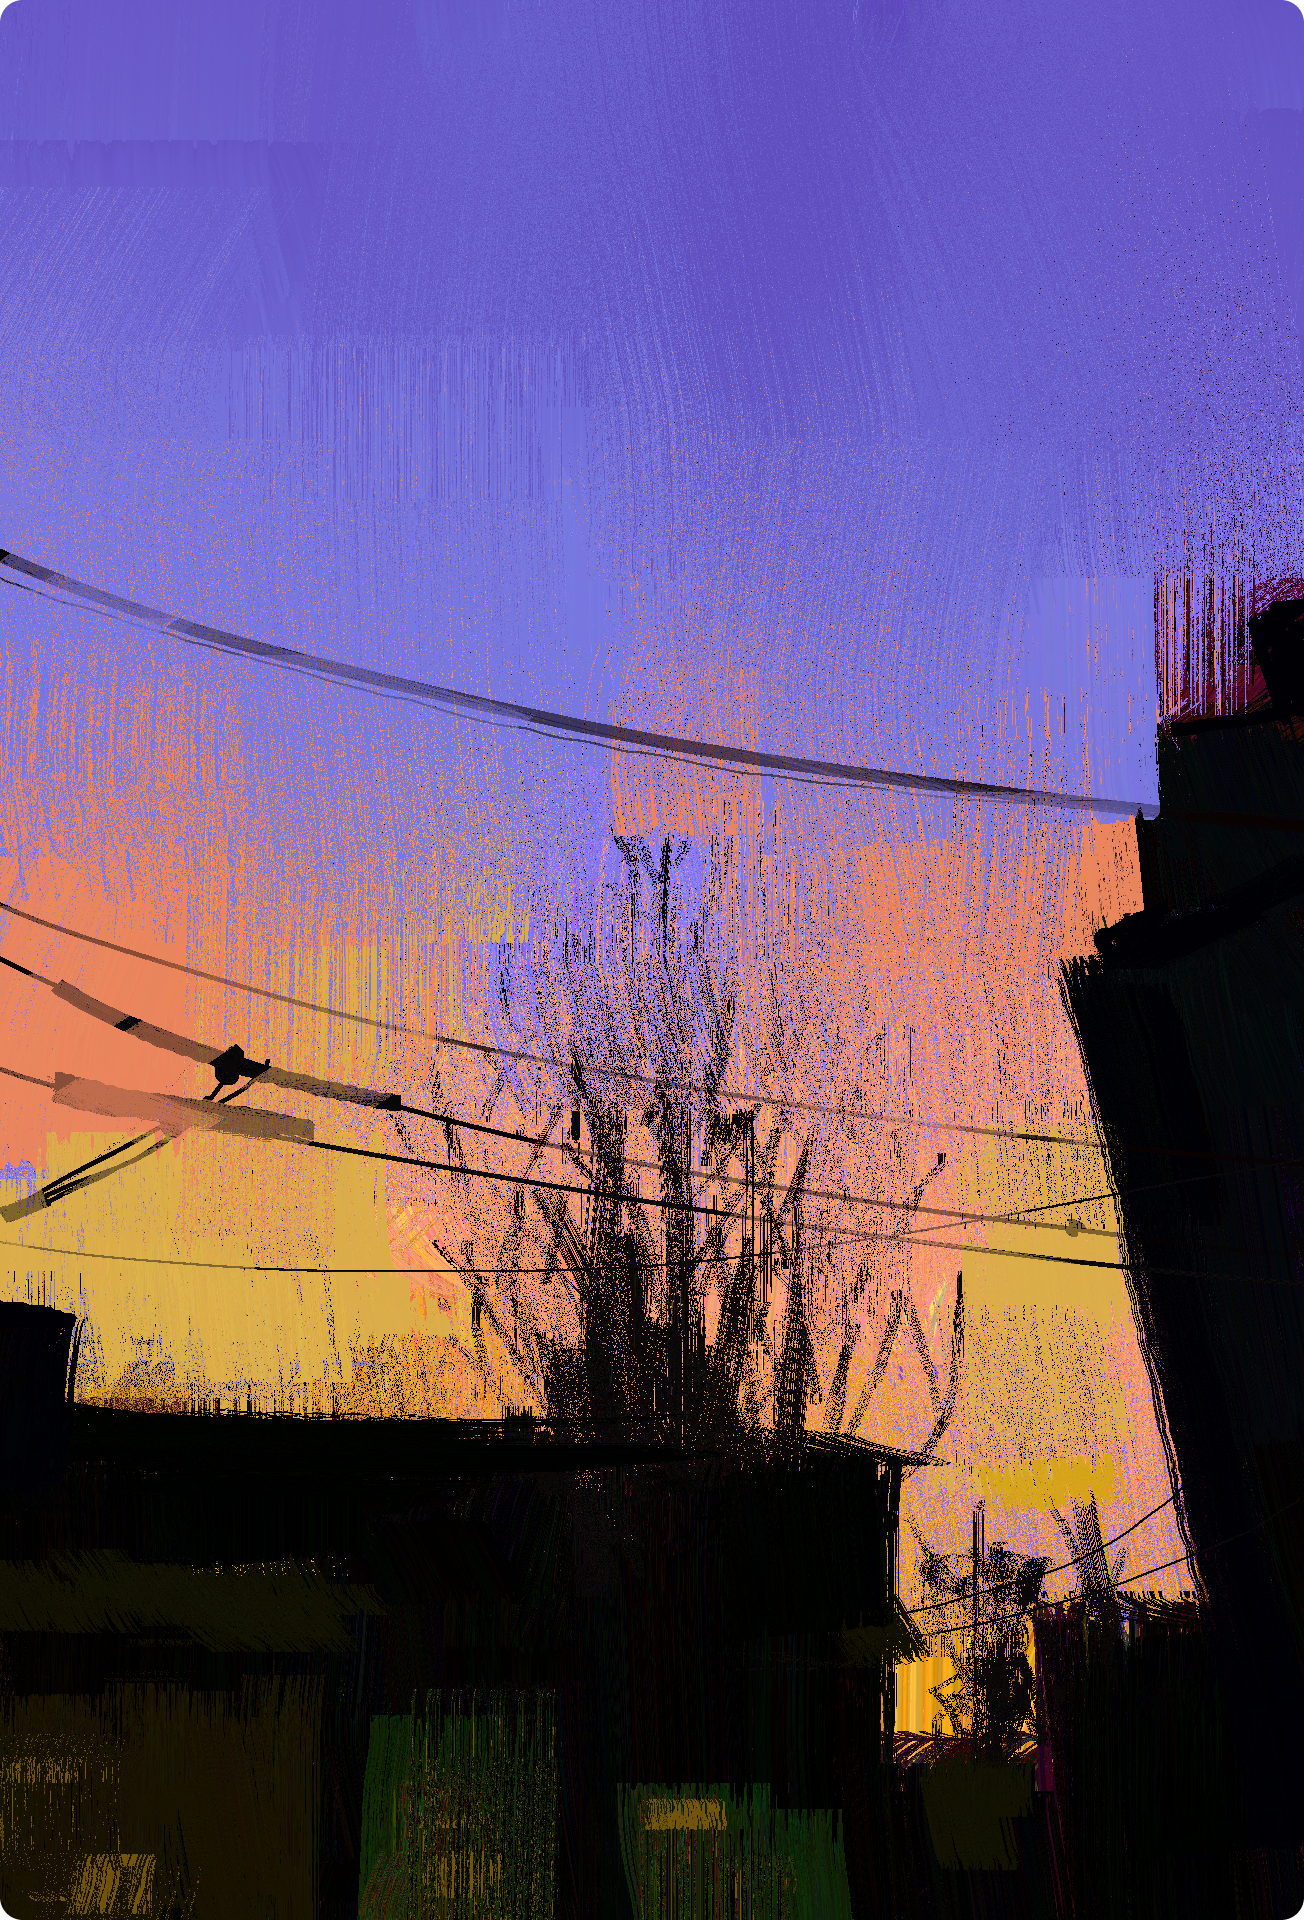 A rough painting of a purple, yellow, and orange sky at sunset, framed by shadowed buildings and power lines. The brush strokes are large and noisy; the trees are poorly scribbled.